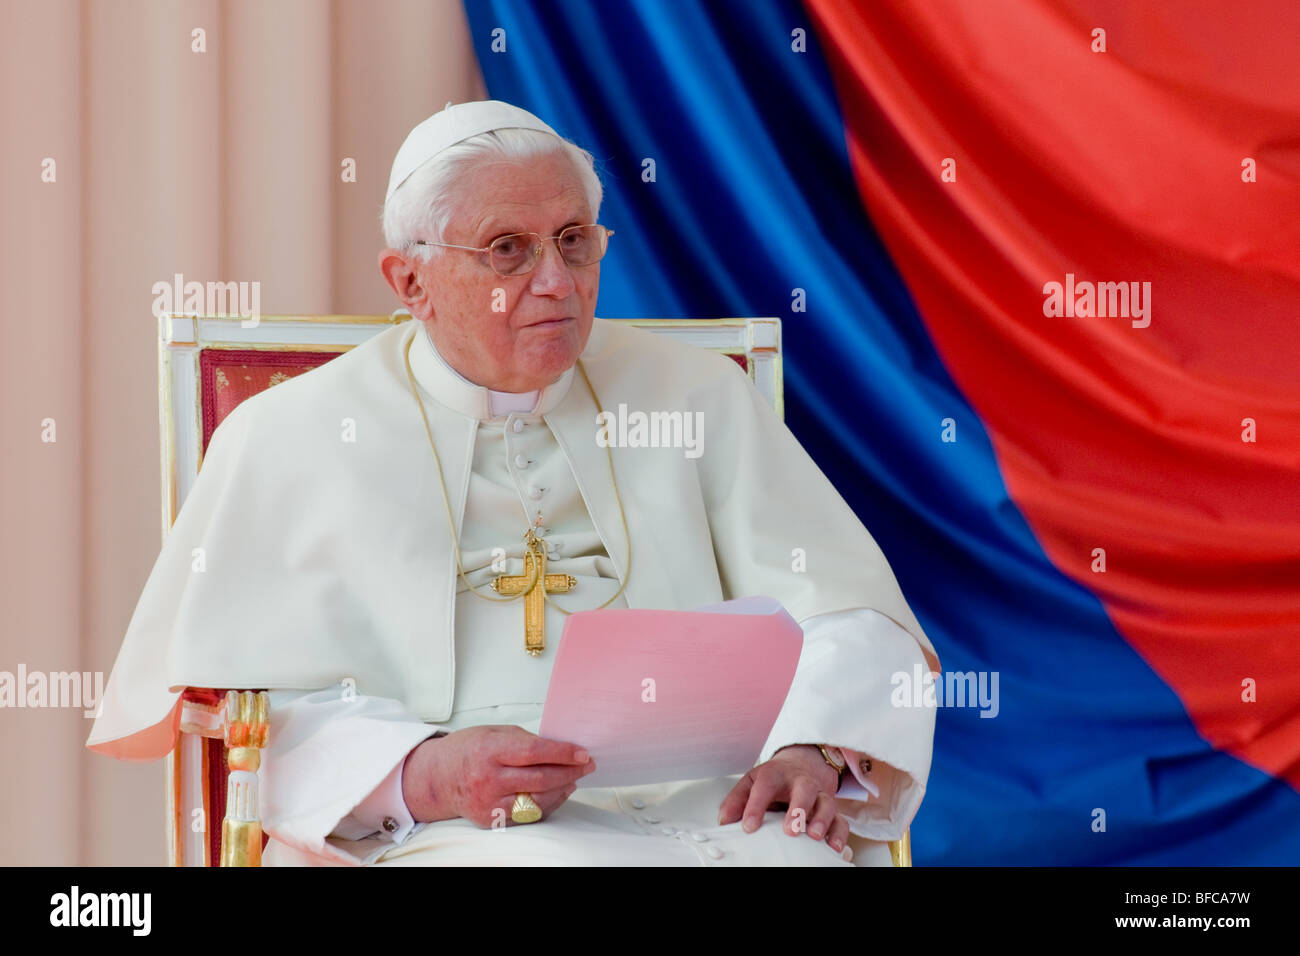 Pope Benedict XVI during the welcome ceremony at the Prague Airport, Czech Republic, 26 September 2009. Stock Photo